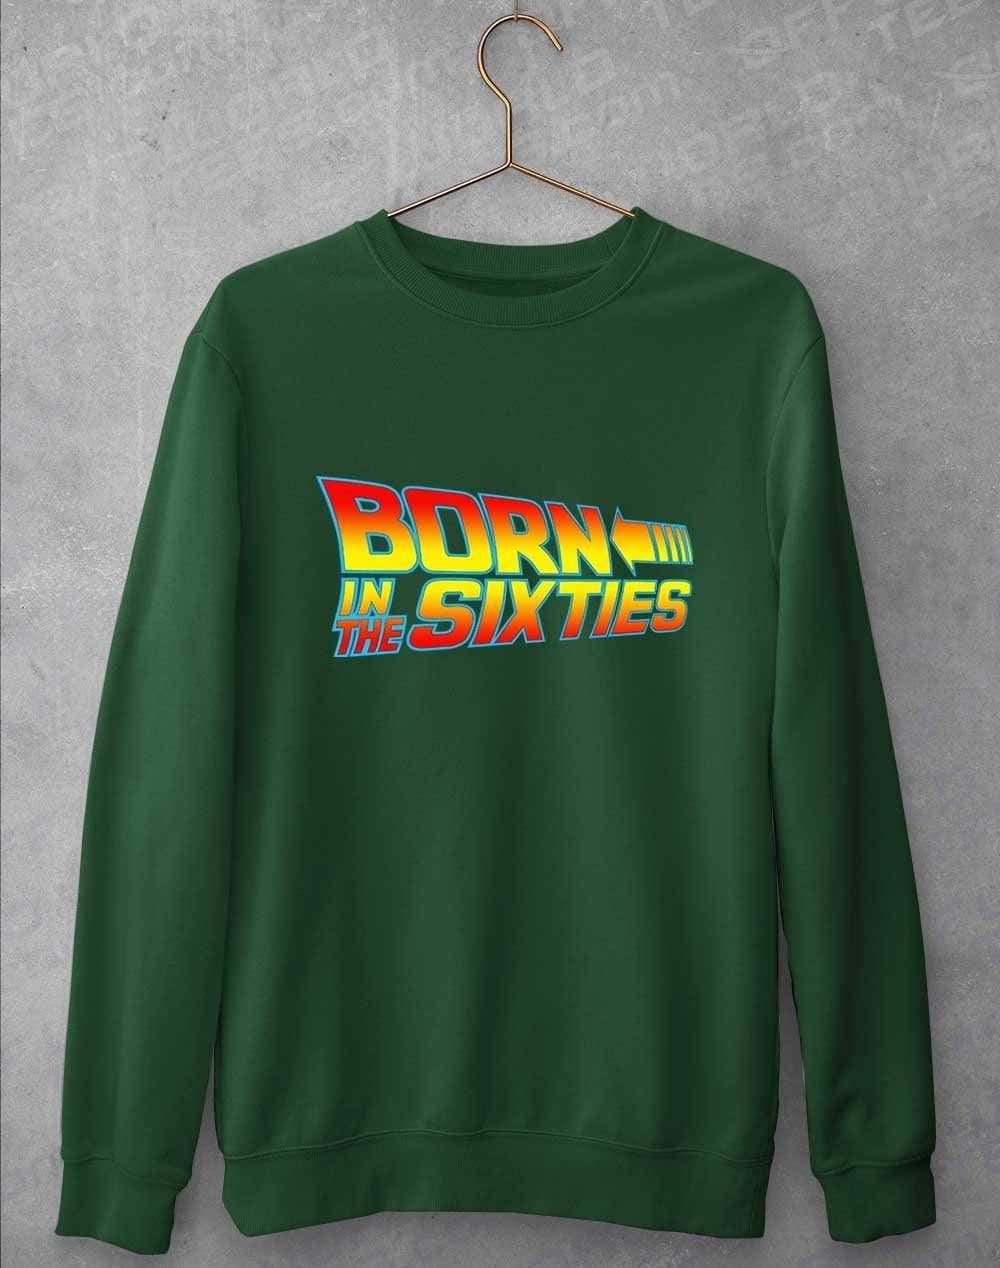 Born in the... (CHOOSE YOUR DECADE!) Sweatshirt 1960s - Bottle Green / S  - Off World Tees